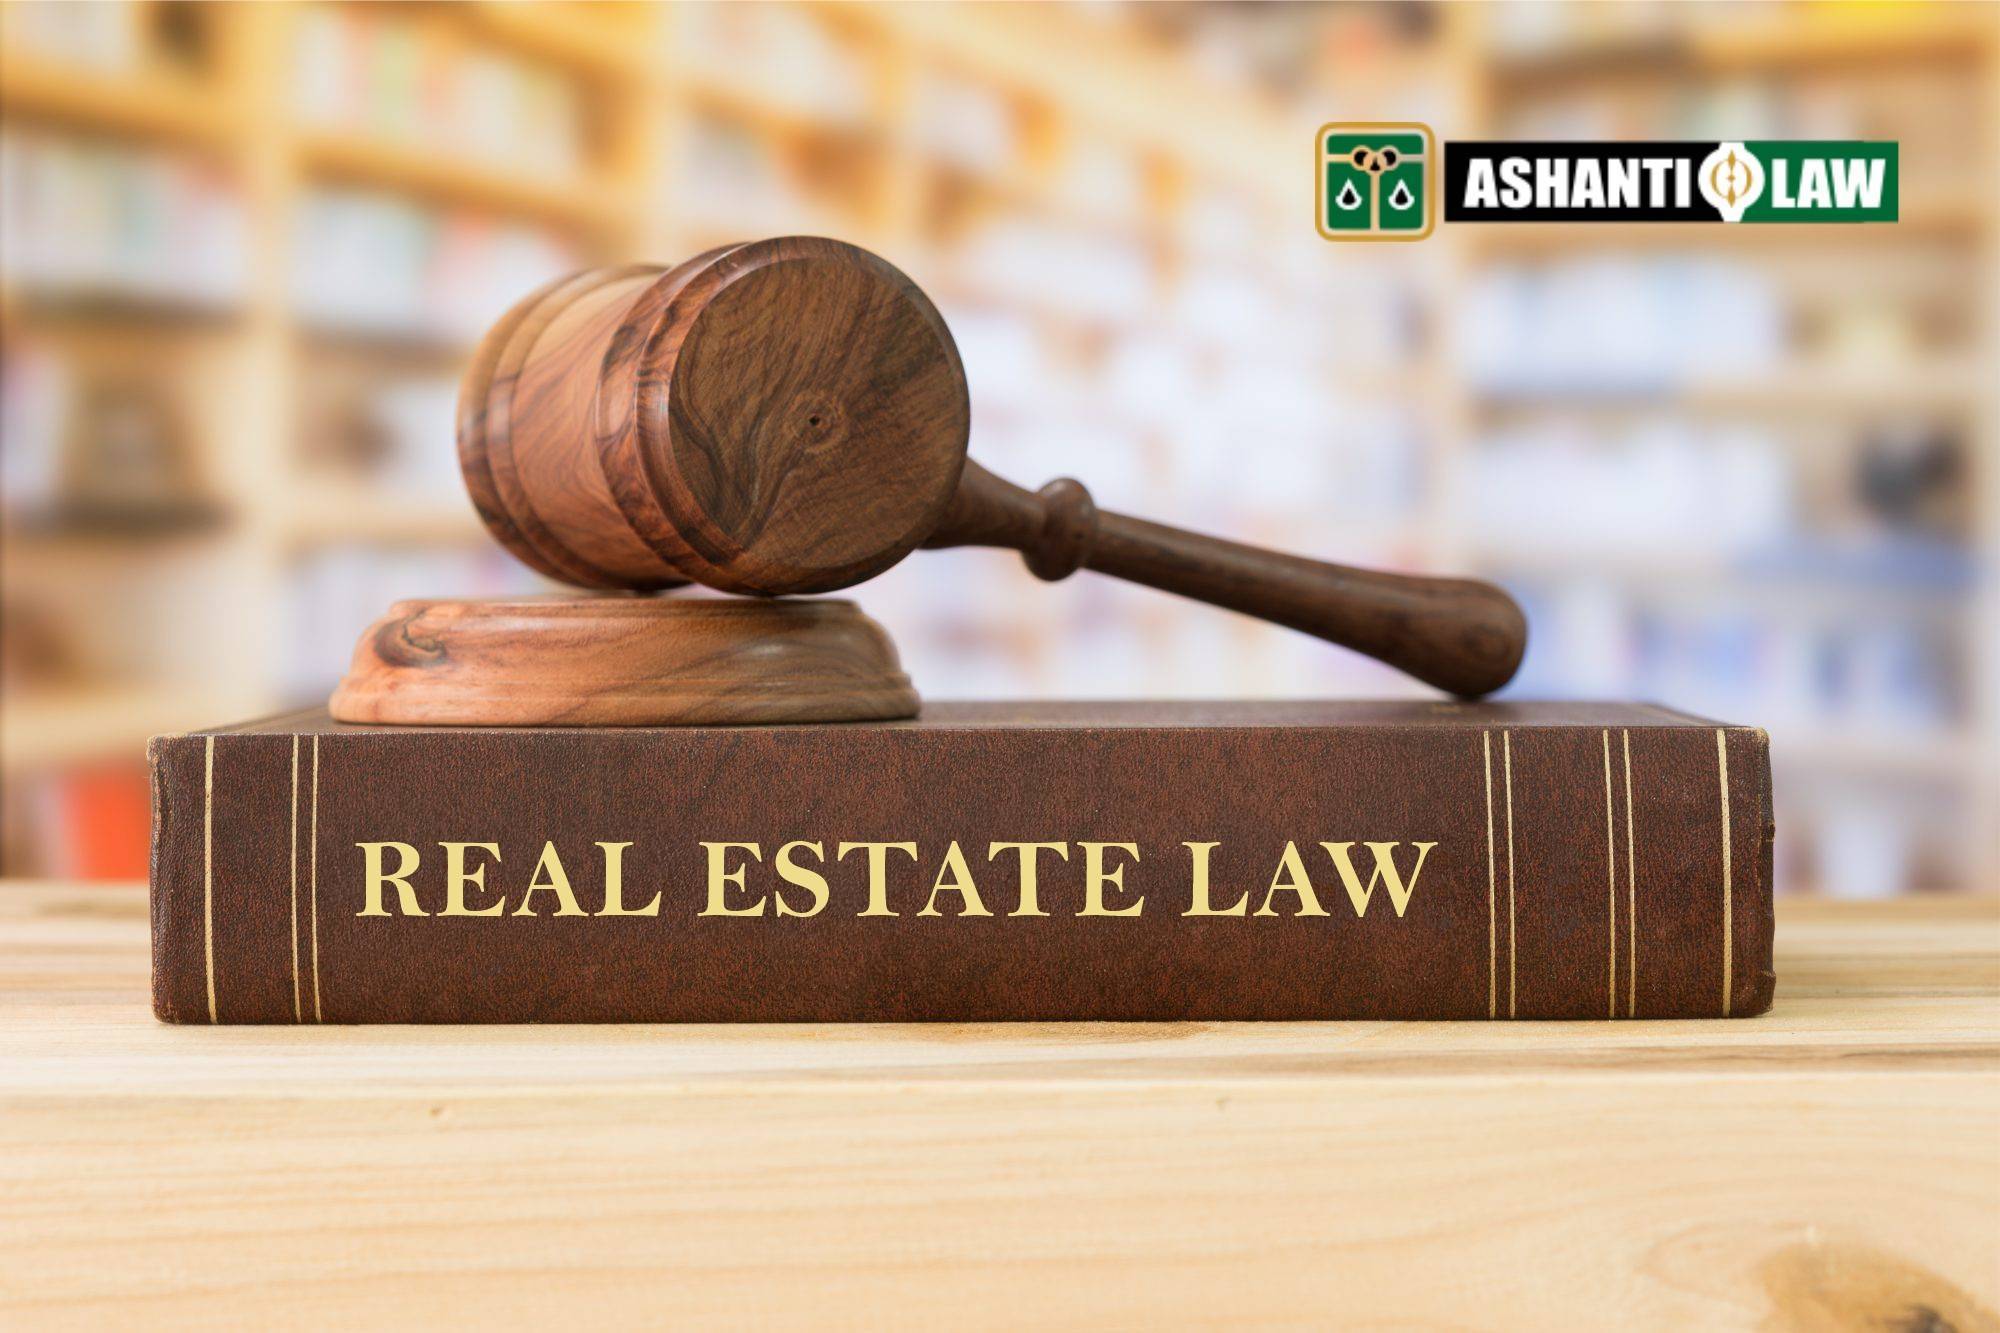 Contract Law and Real Estate Law